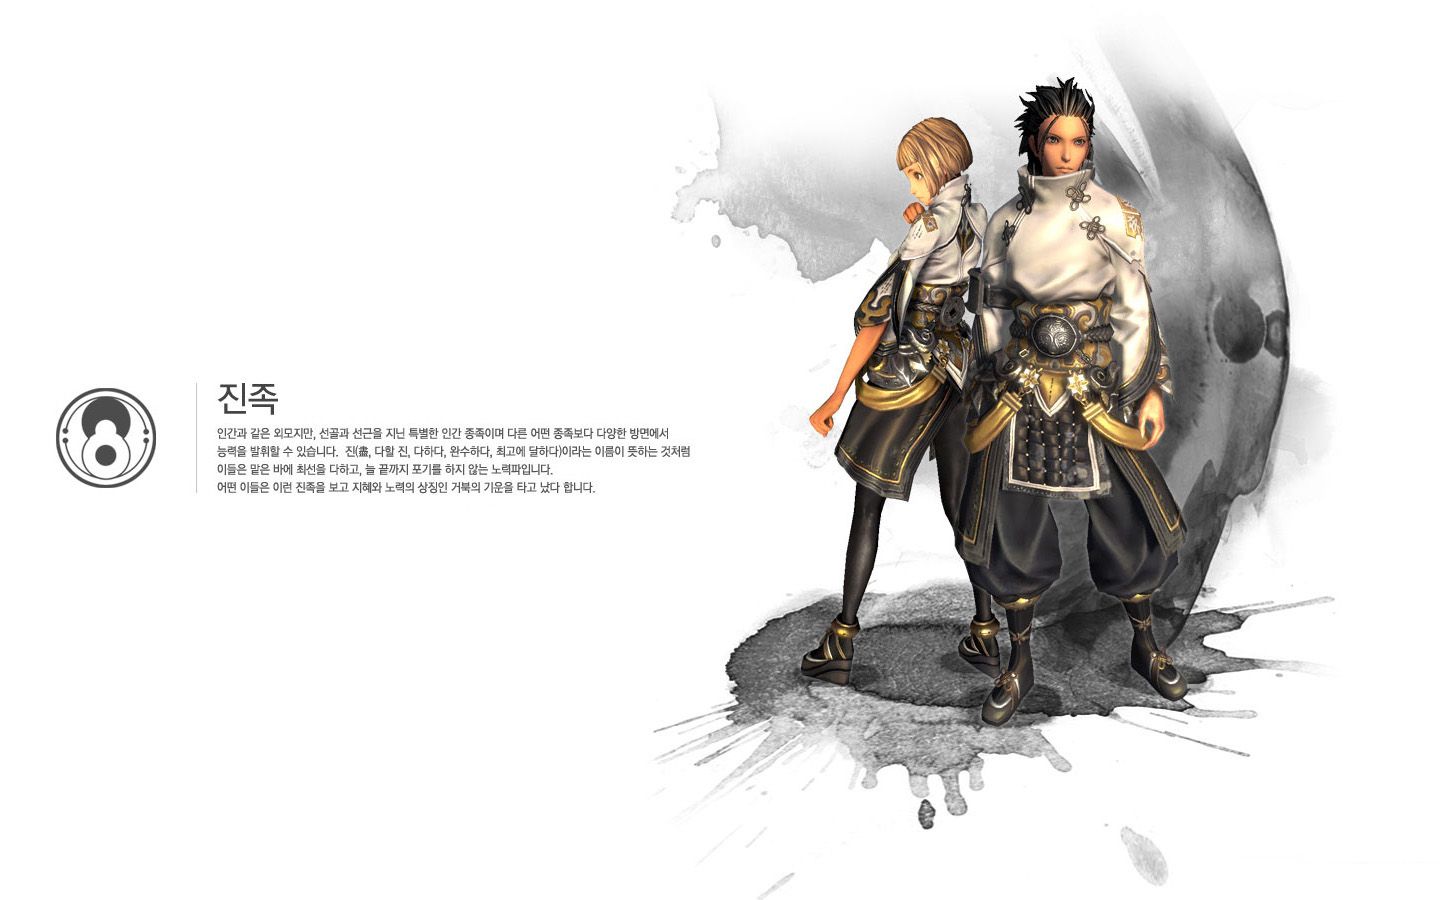 Blade and Soul Wallpaper by lishang 2   1440x900   Blade and Soul